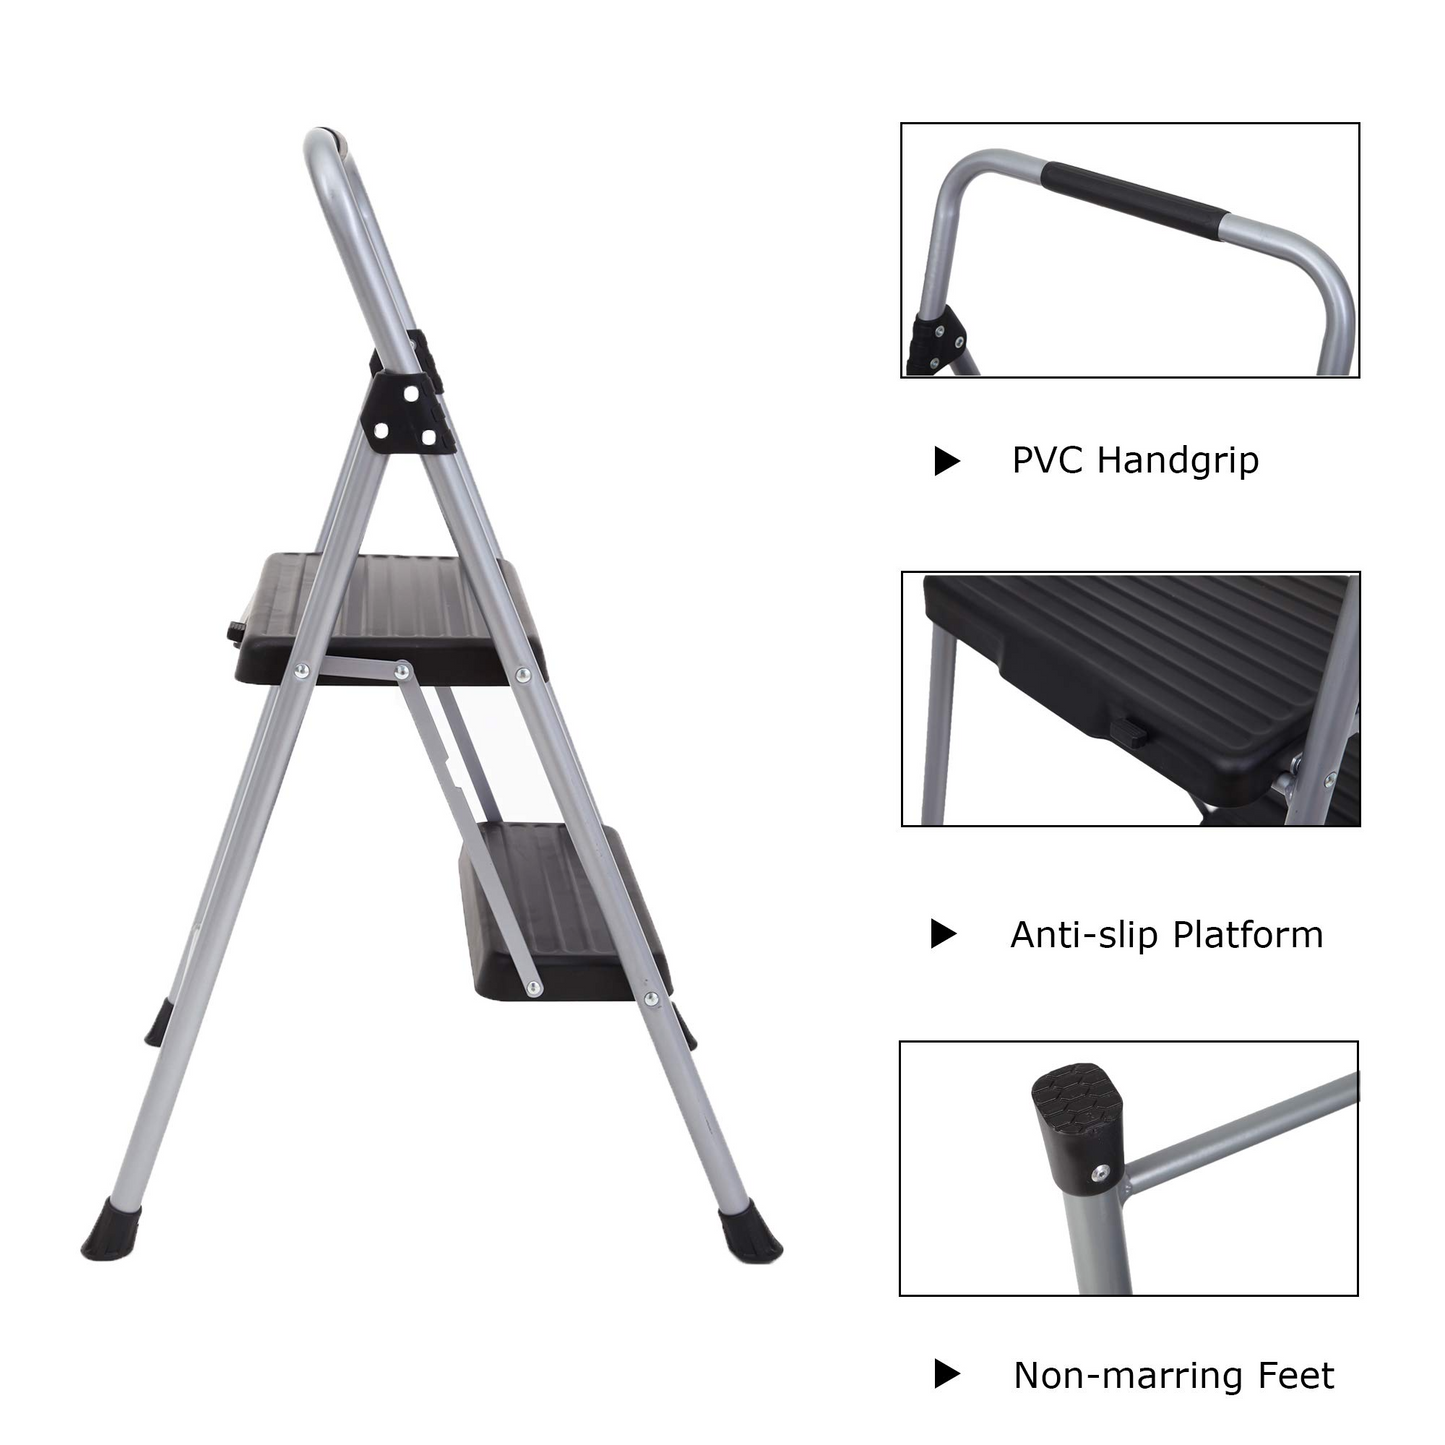 Topfun Folding 2 Step Ladder Lightweight Steel Step Stool Sturdy Anti-Slip Wide Platform with PVC Handgrip Easy-to-Carry Ladder Fully Assembled Multi-Use Ladder for Home and Office (2 Step)